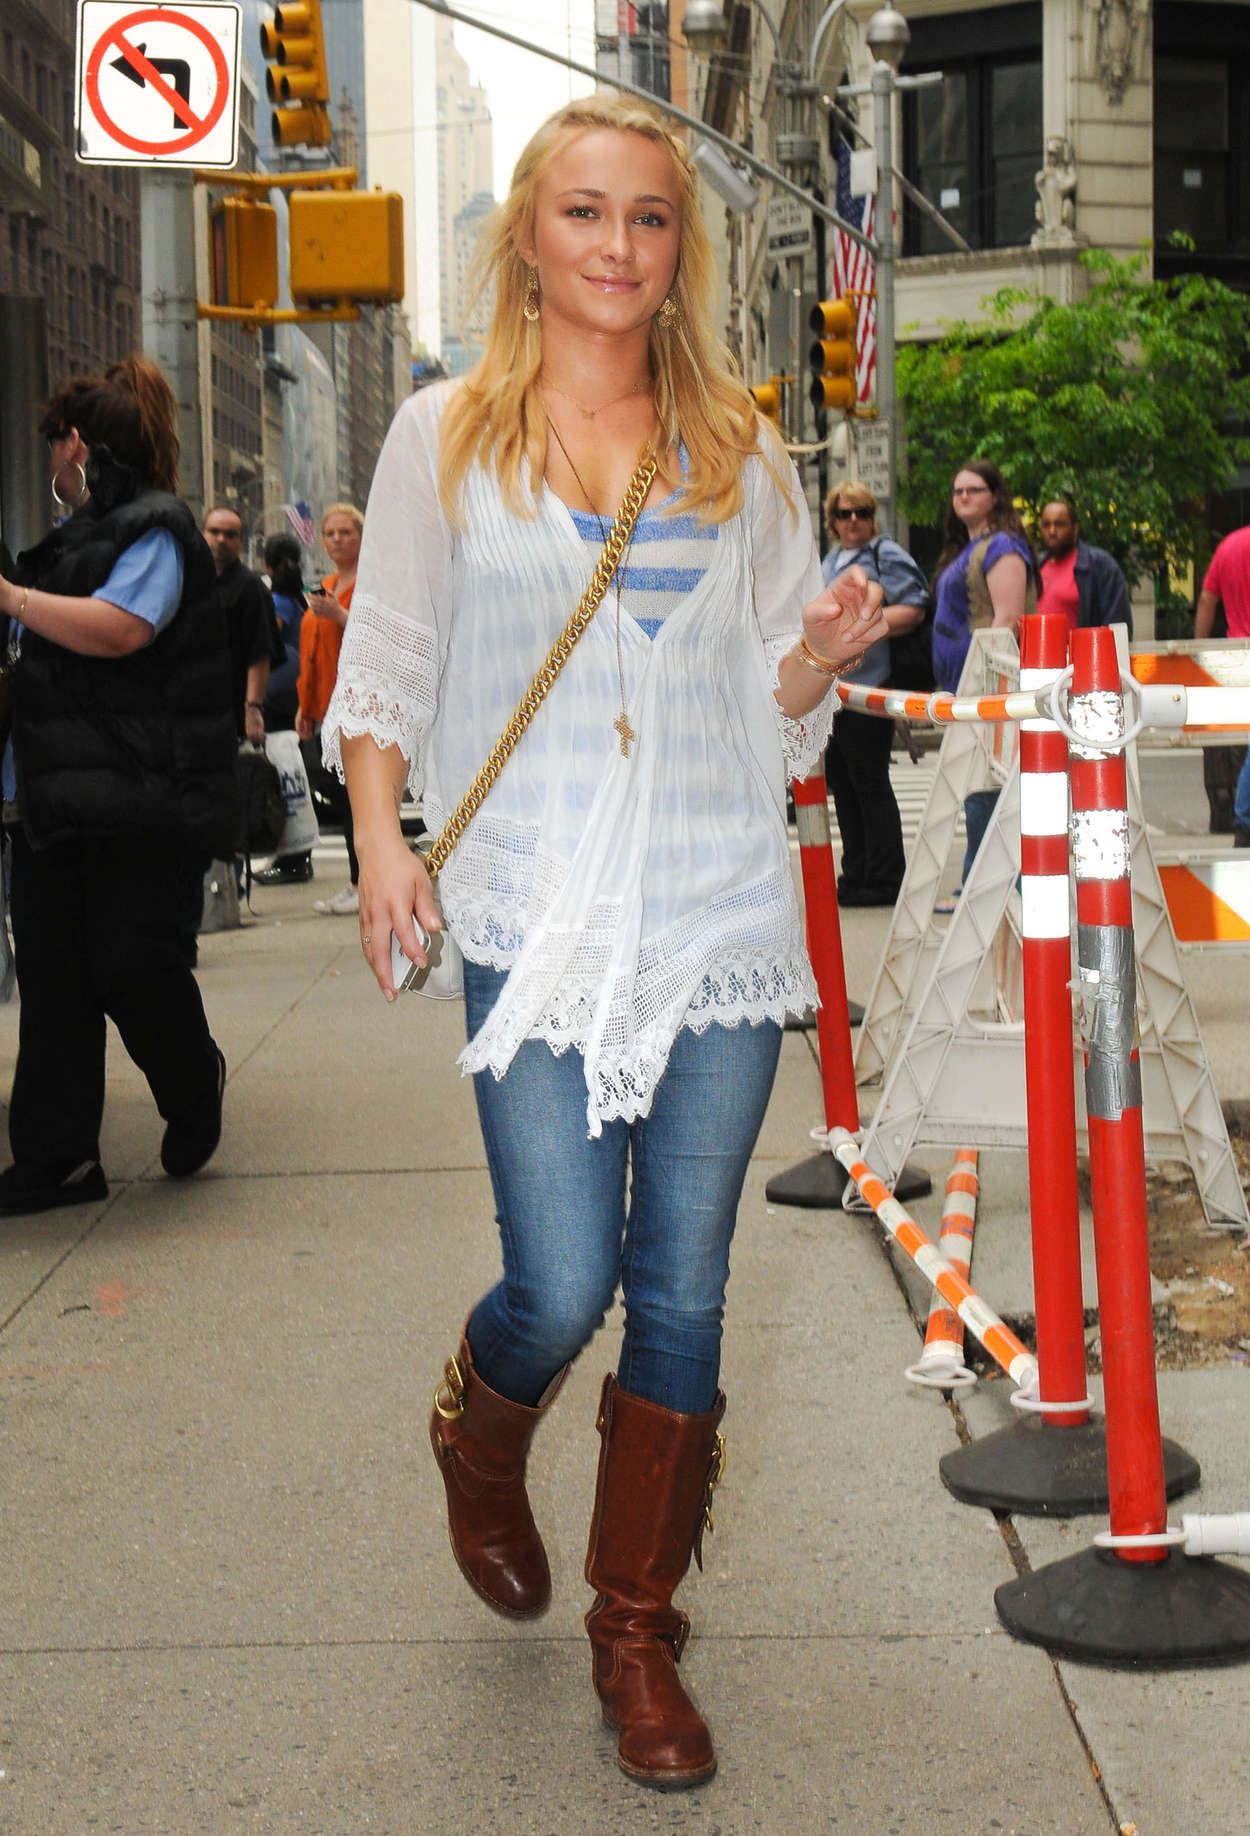 Hayden Panettiere - Looking cute In a tight jeans and boots in New York City